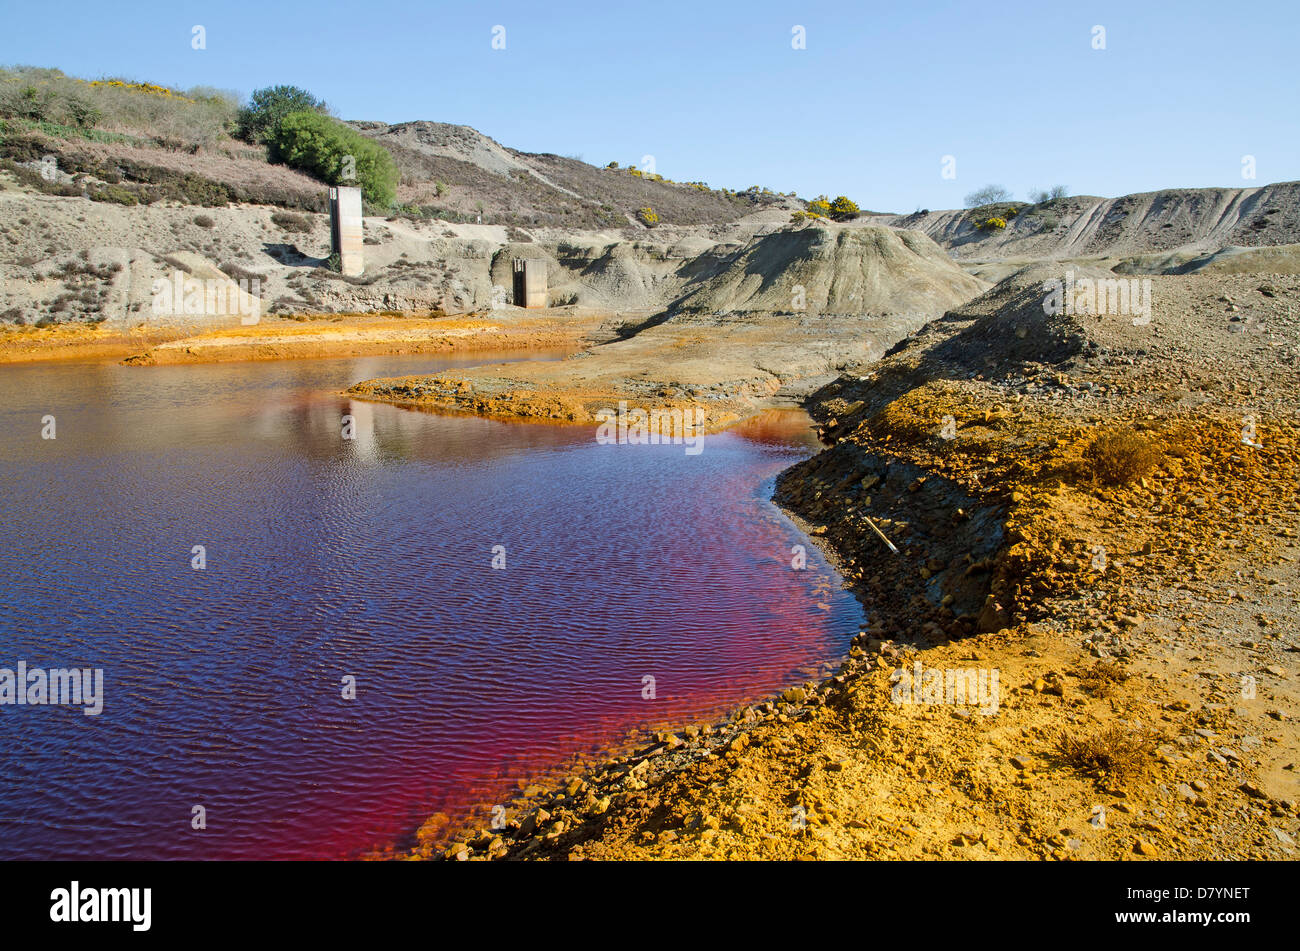 Contaminated land and water on the old Wheal Maid copper mine near St.Day in Cornwall, UK Stock Photo